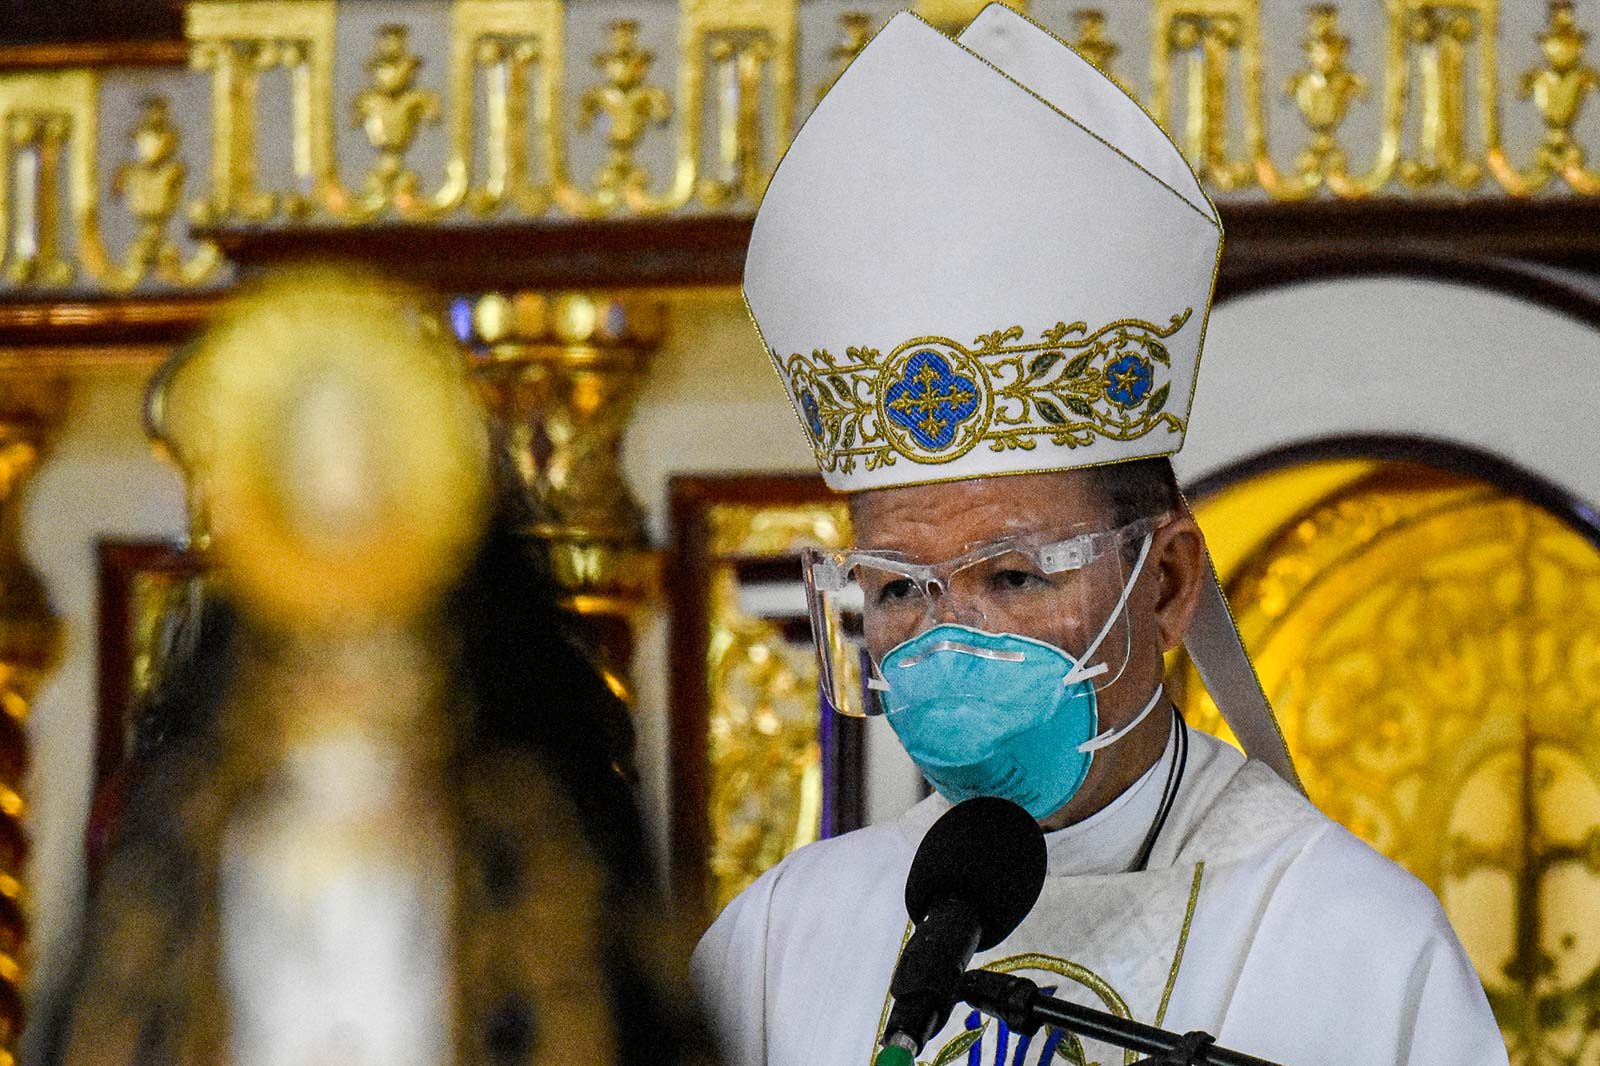 New Manila archbishop tests positive for COVID-19